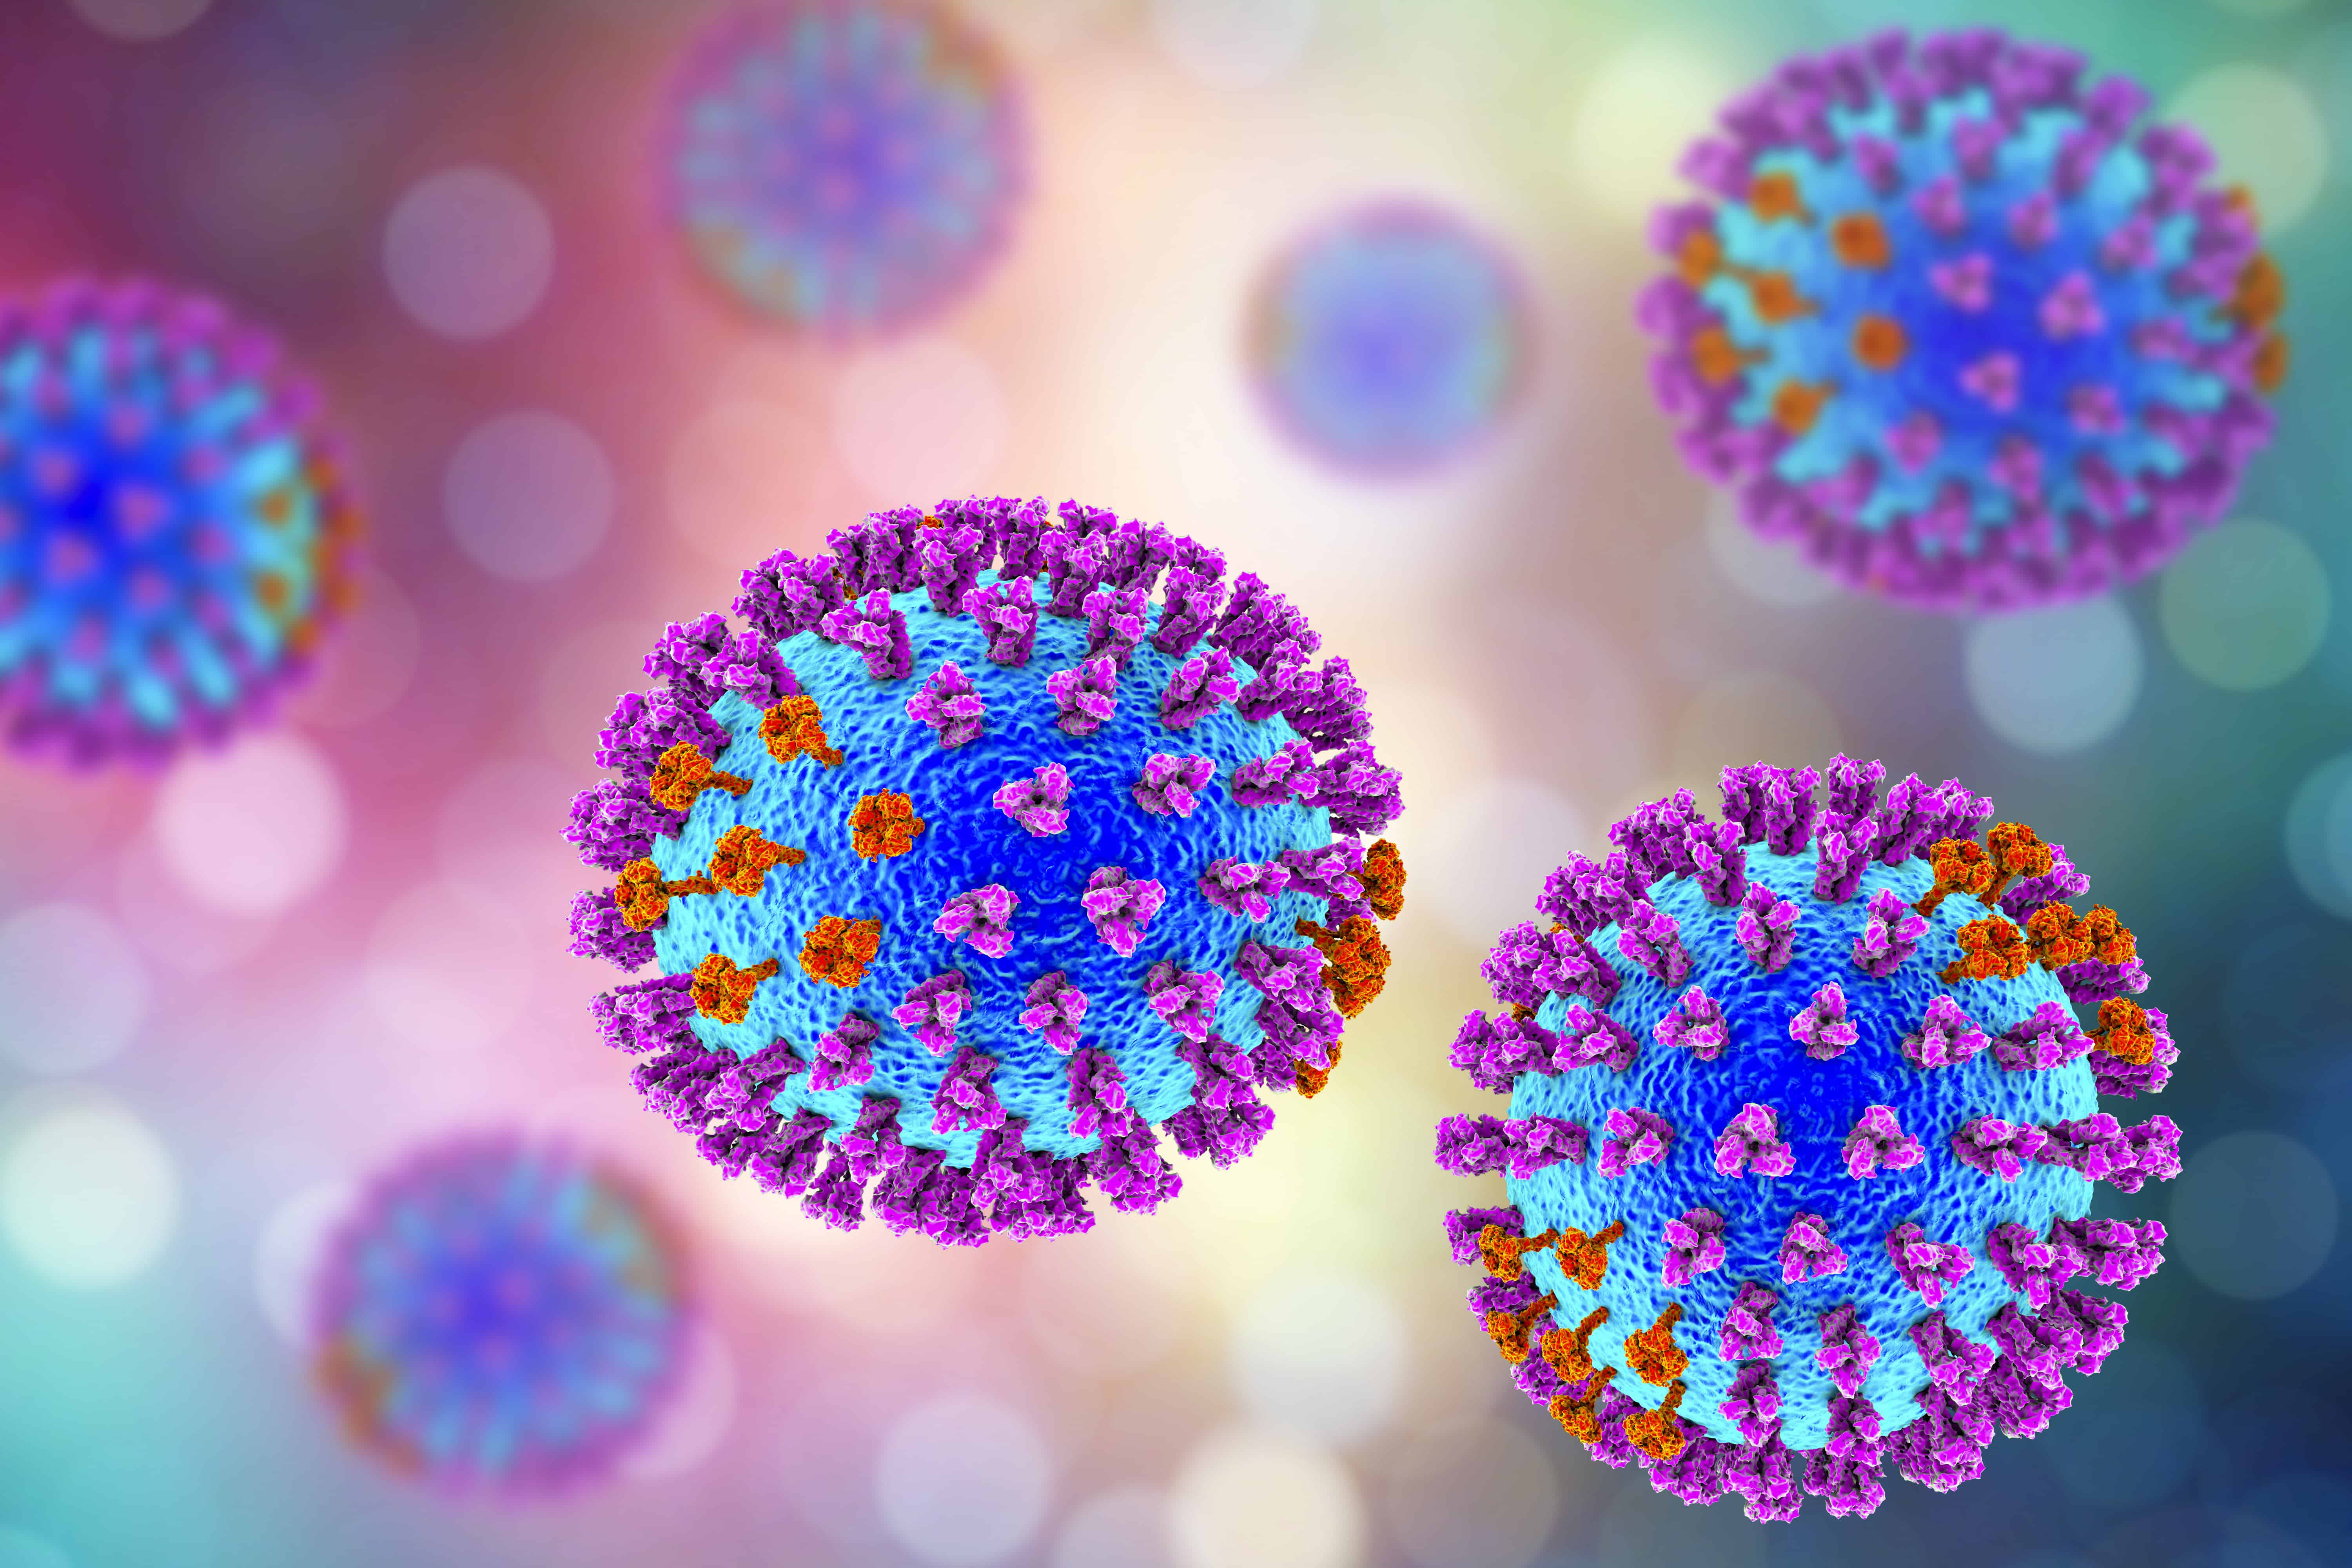 Influenza A H1N1 in New Zealand - Experts respond 